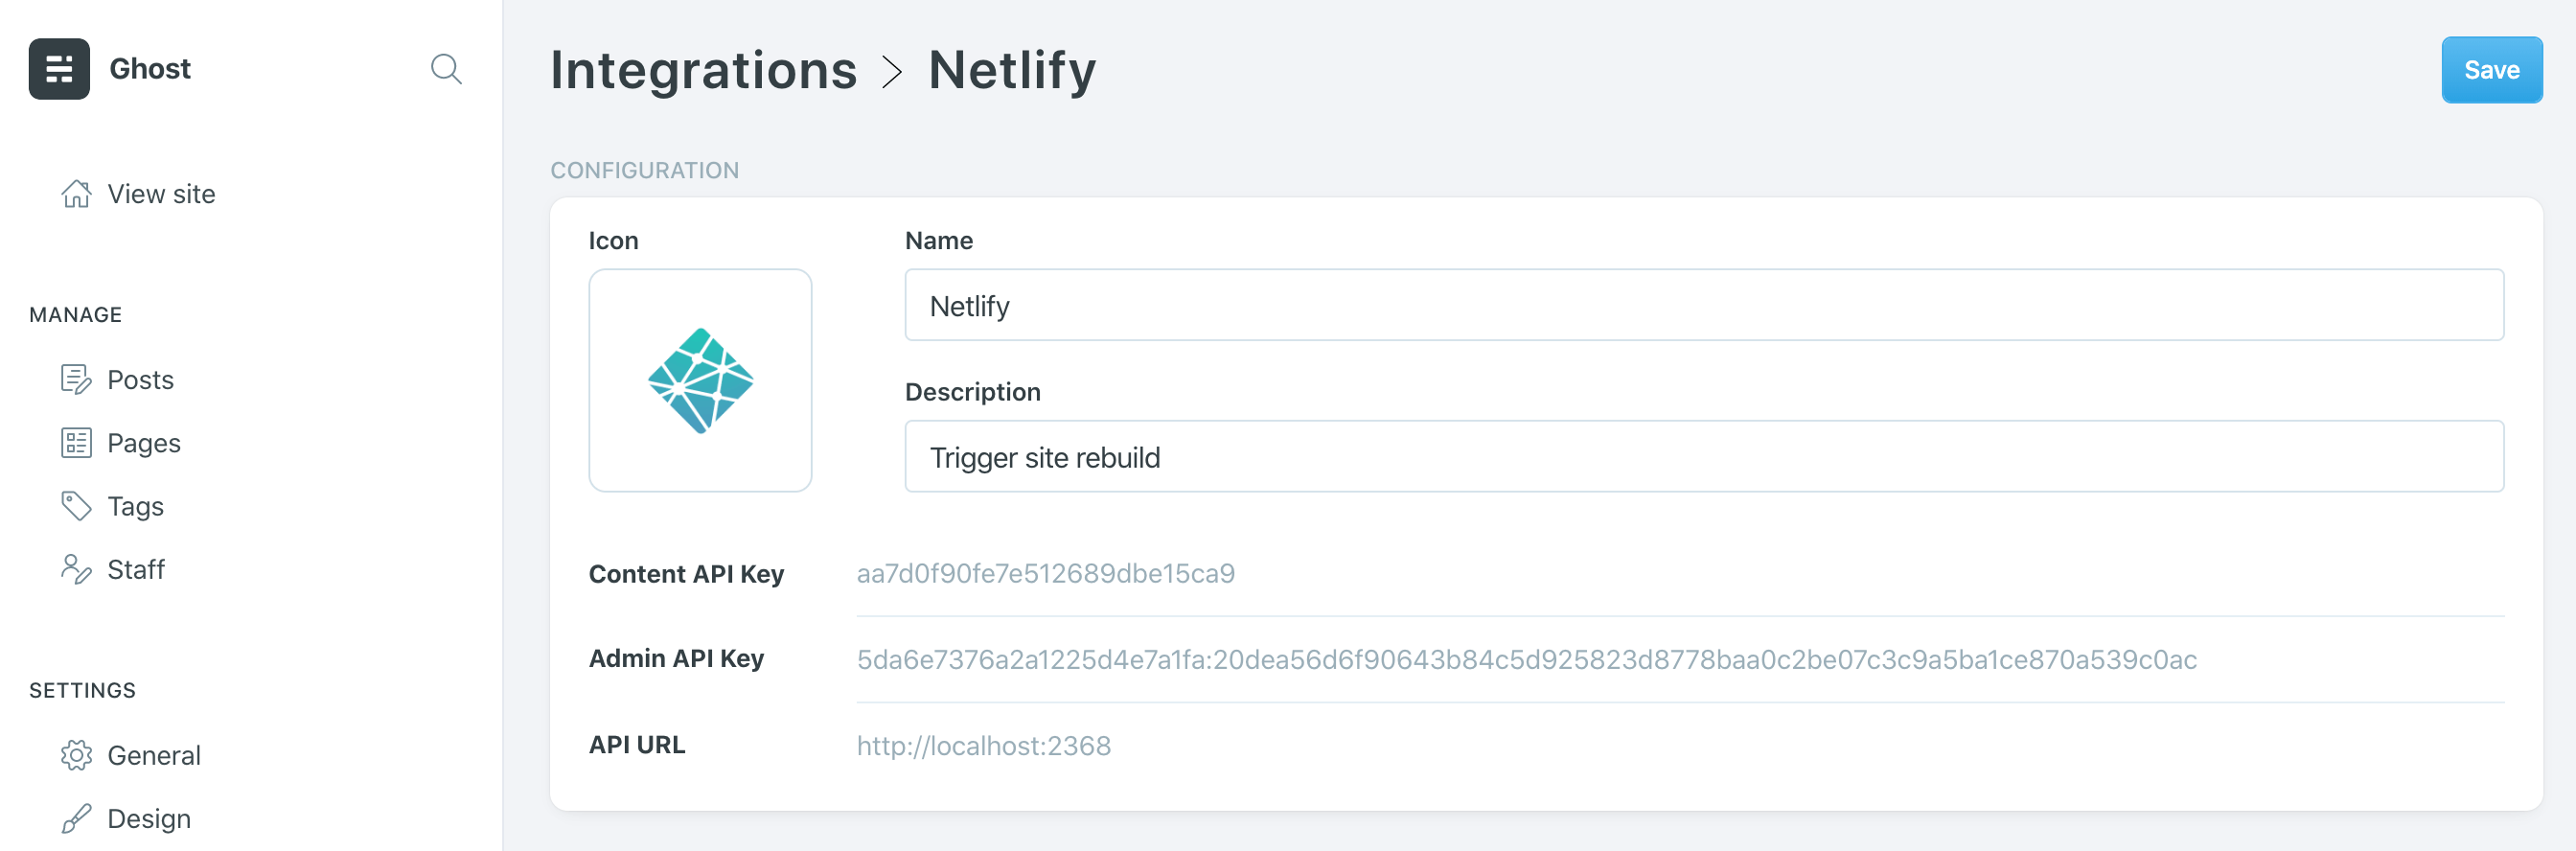 Screenshot of custom integrations with webhooks in Ghost Admin